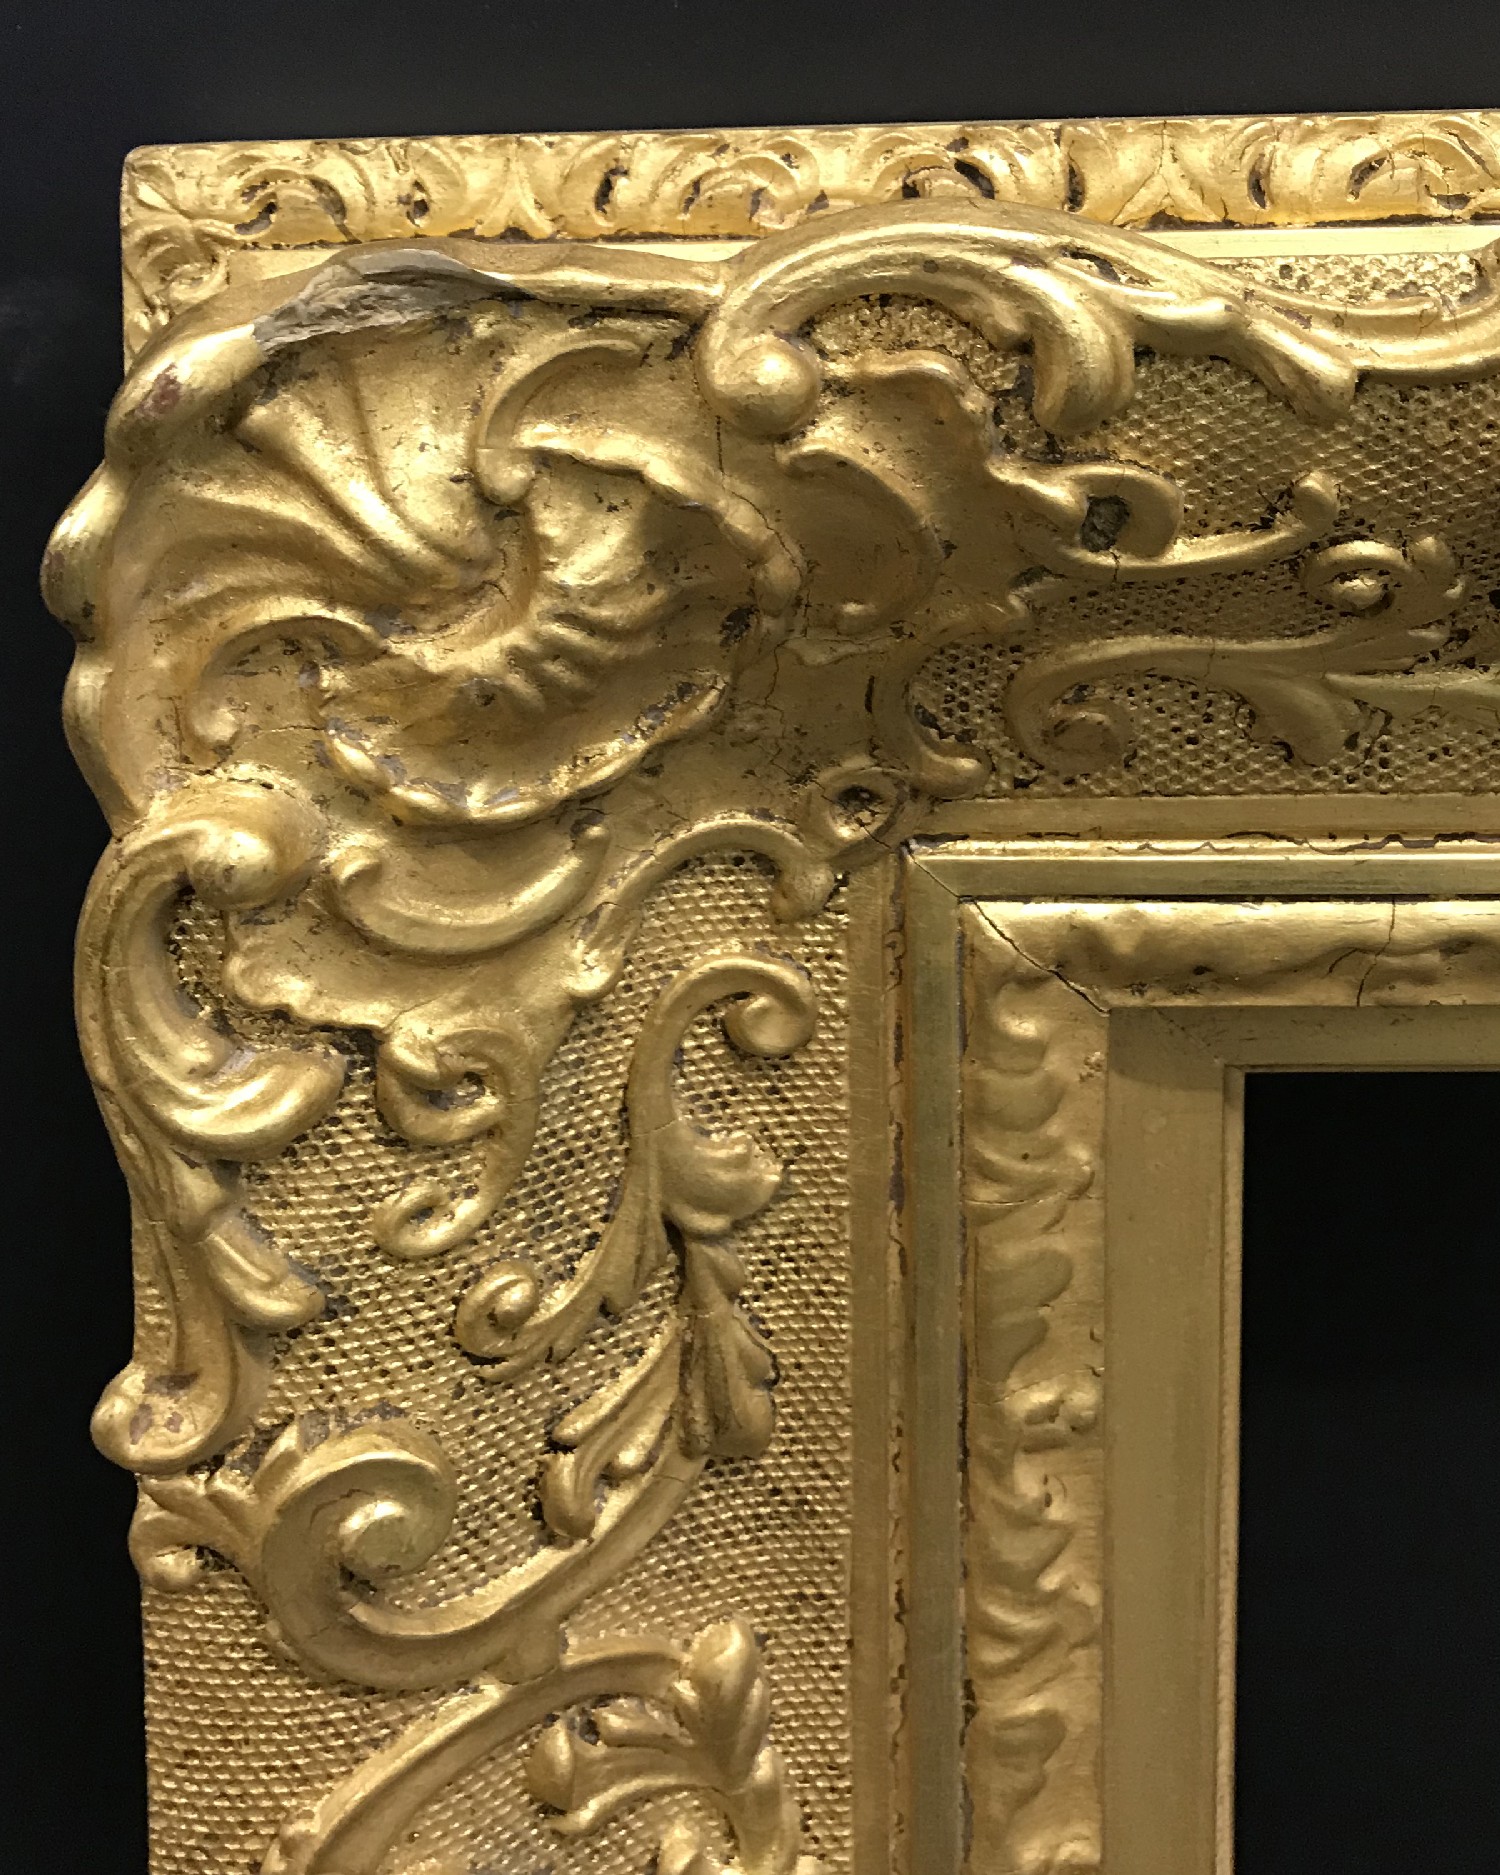 19th Century English School. A Fine Gilt Composition Frame, with Swept Corners, 24" x 20" (rebate).